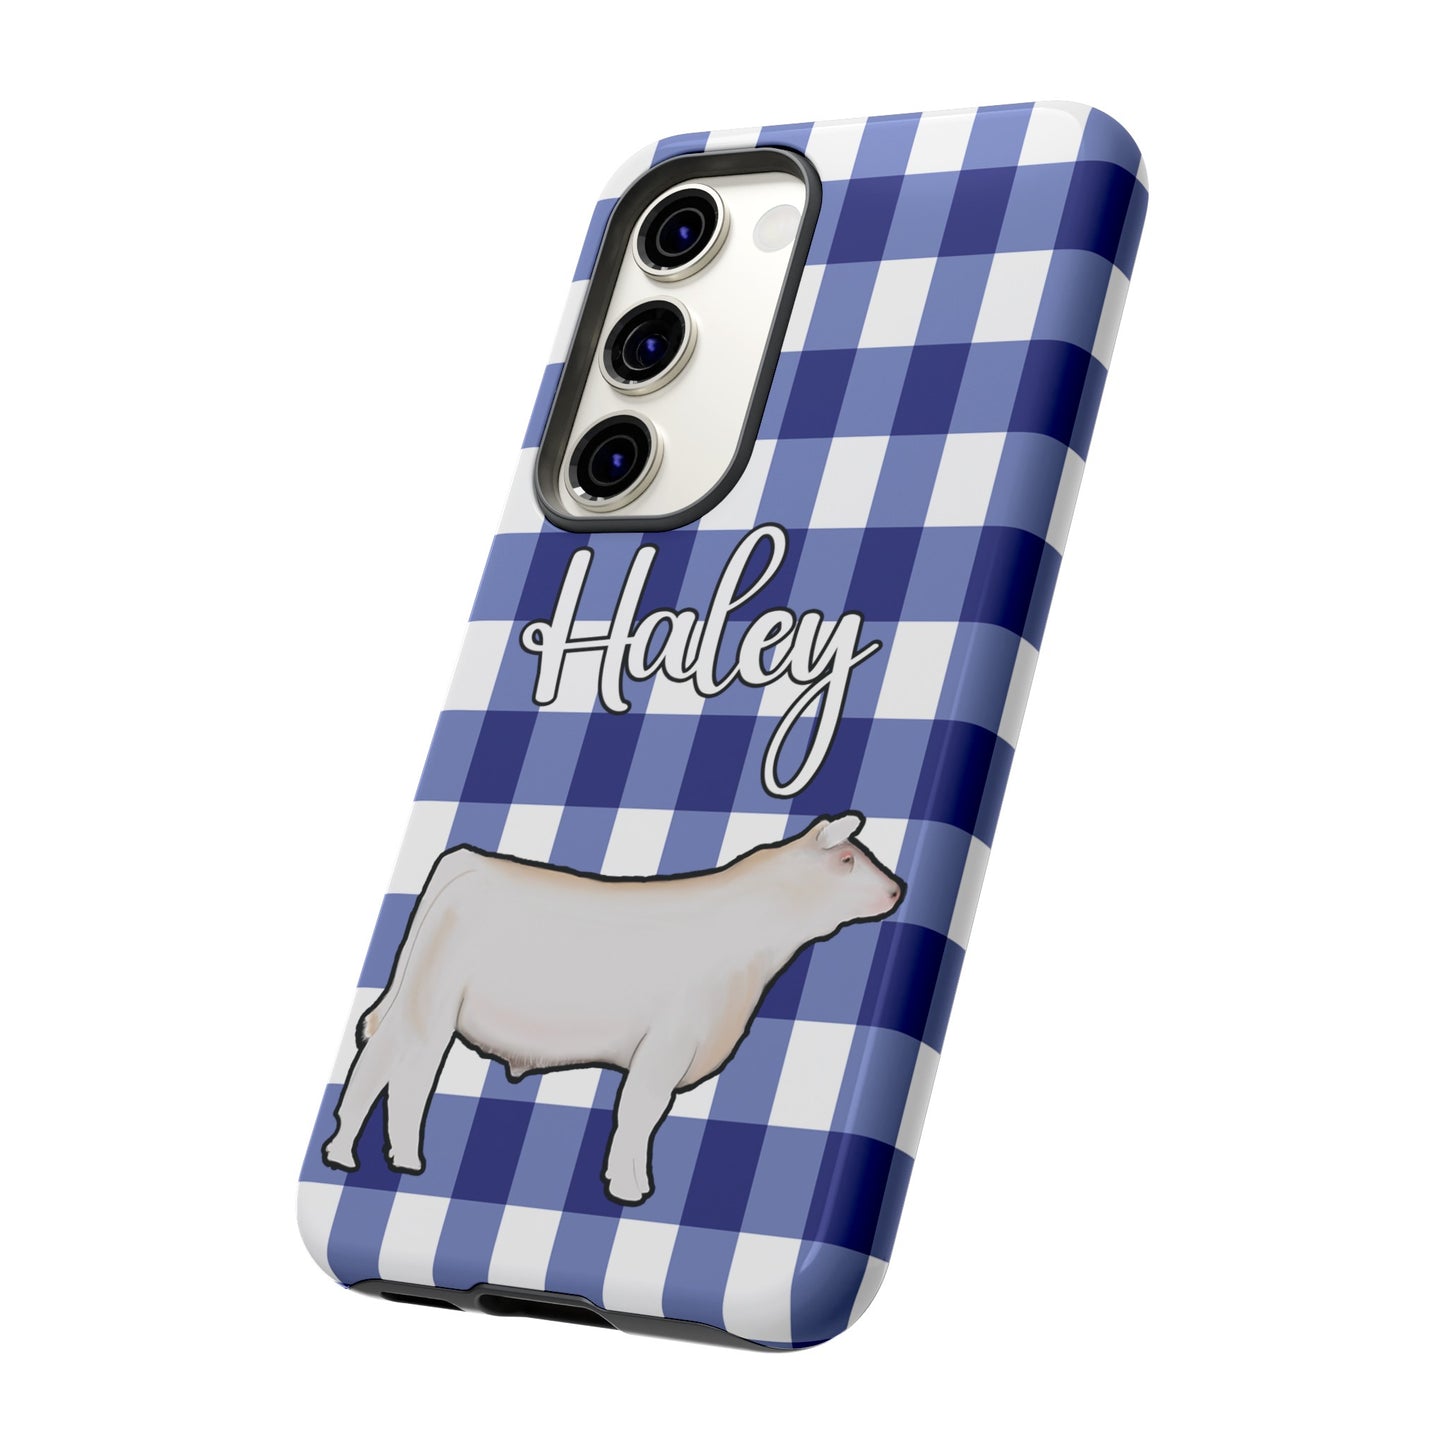 Livestock Show Cow - Livestock Charolais Steer - Android Cow Phone Cases